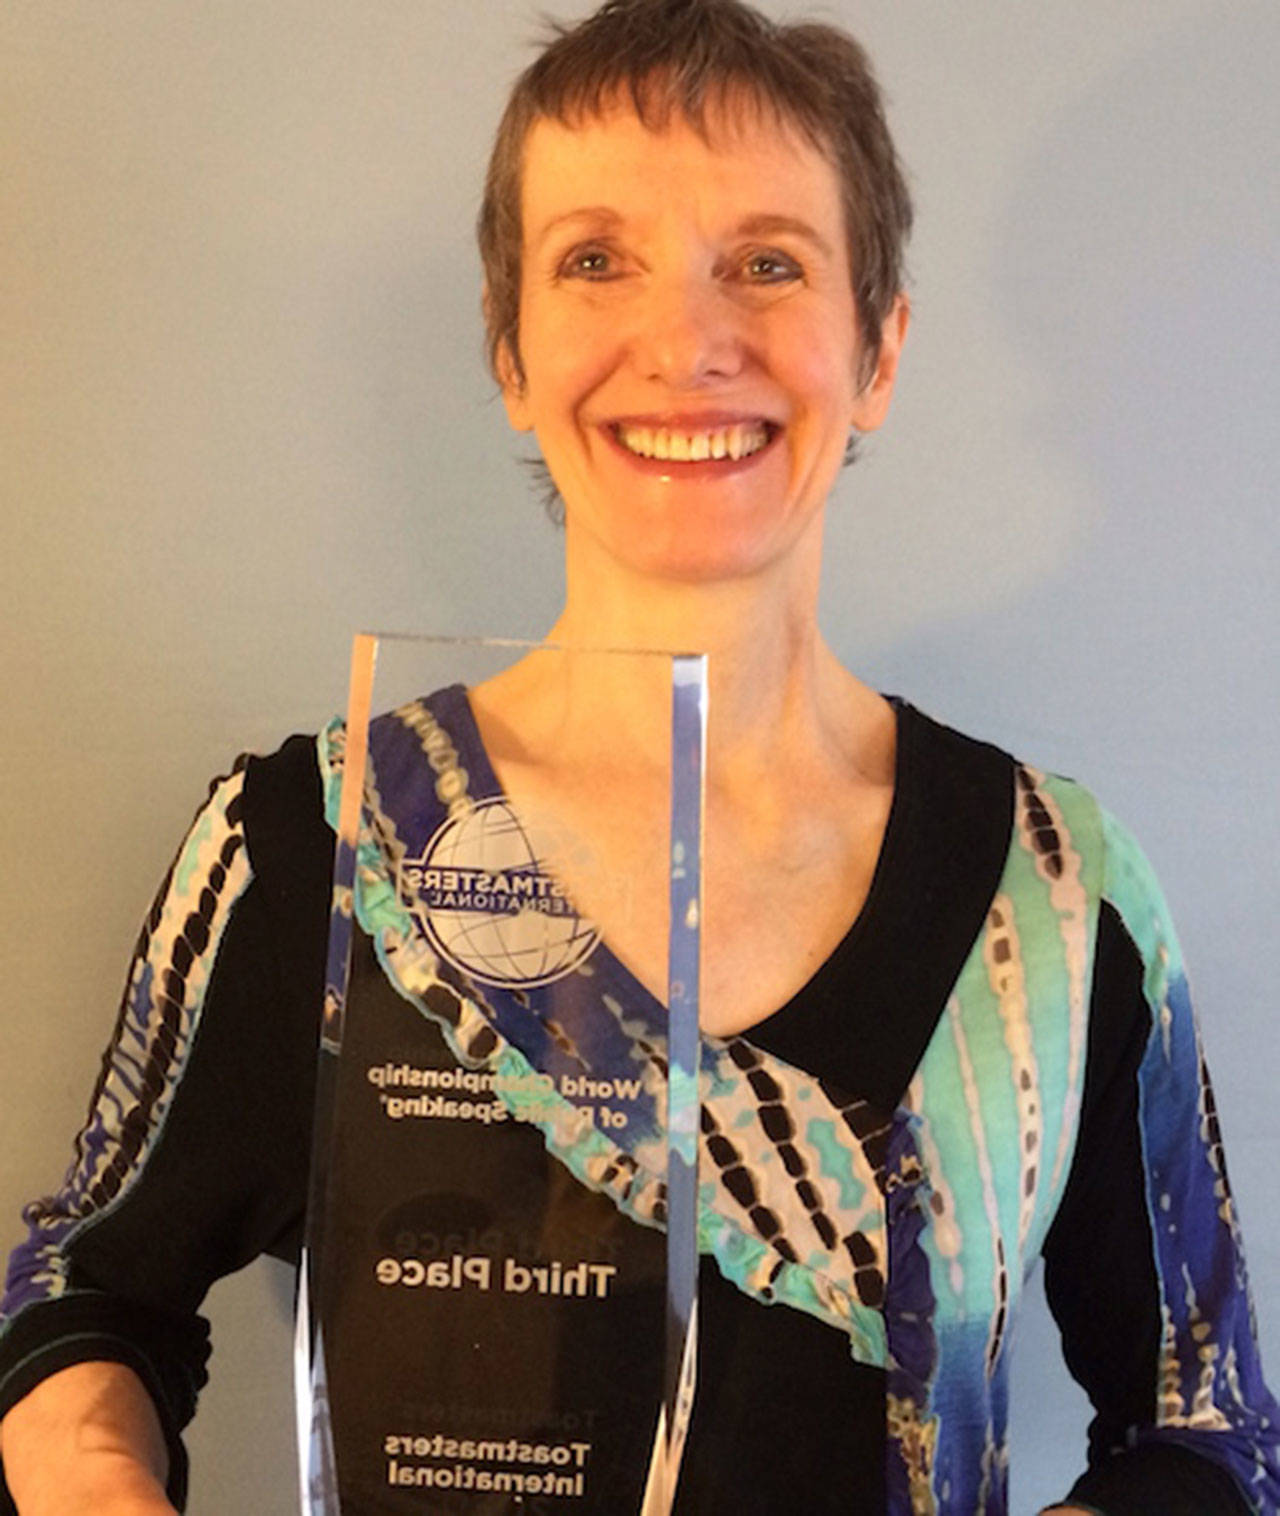 Lindy MacLaine, pictured here with her third place trophy from the 2020 Virtual World Championship of Public Speaking, invites the community to the next Skwim Toastmasters virtual meeting set for Tuesday.